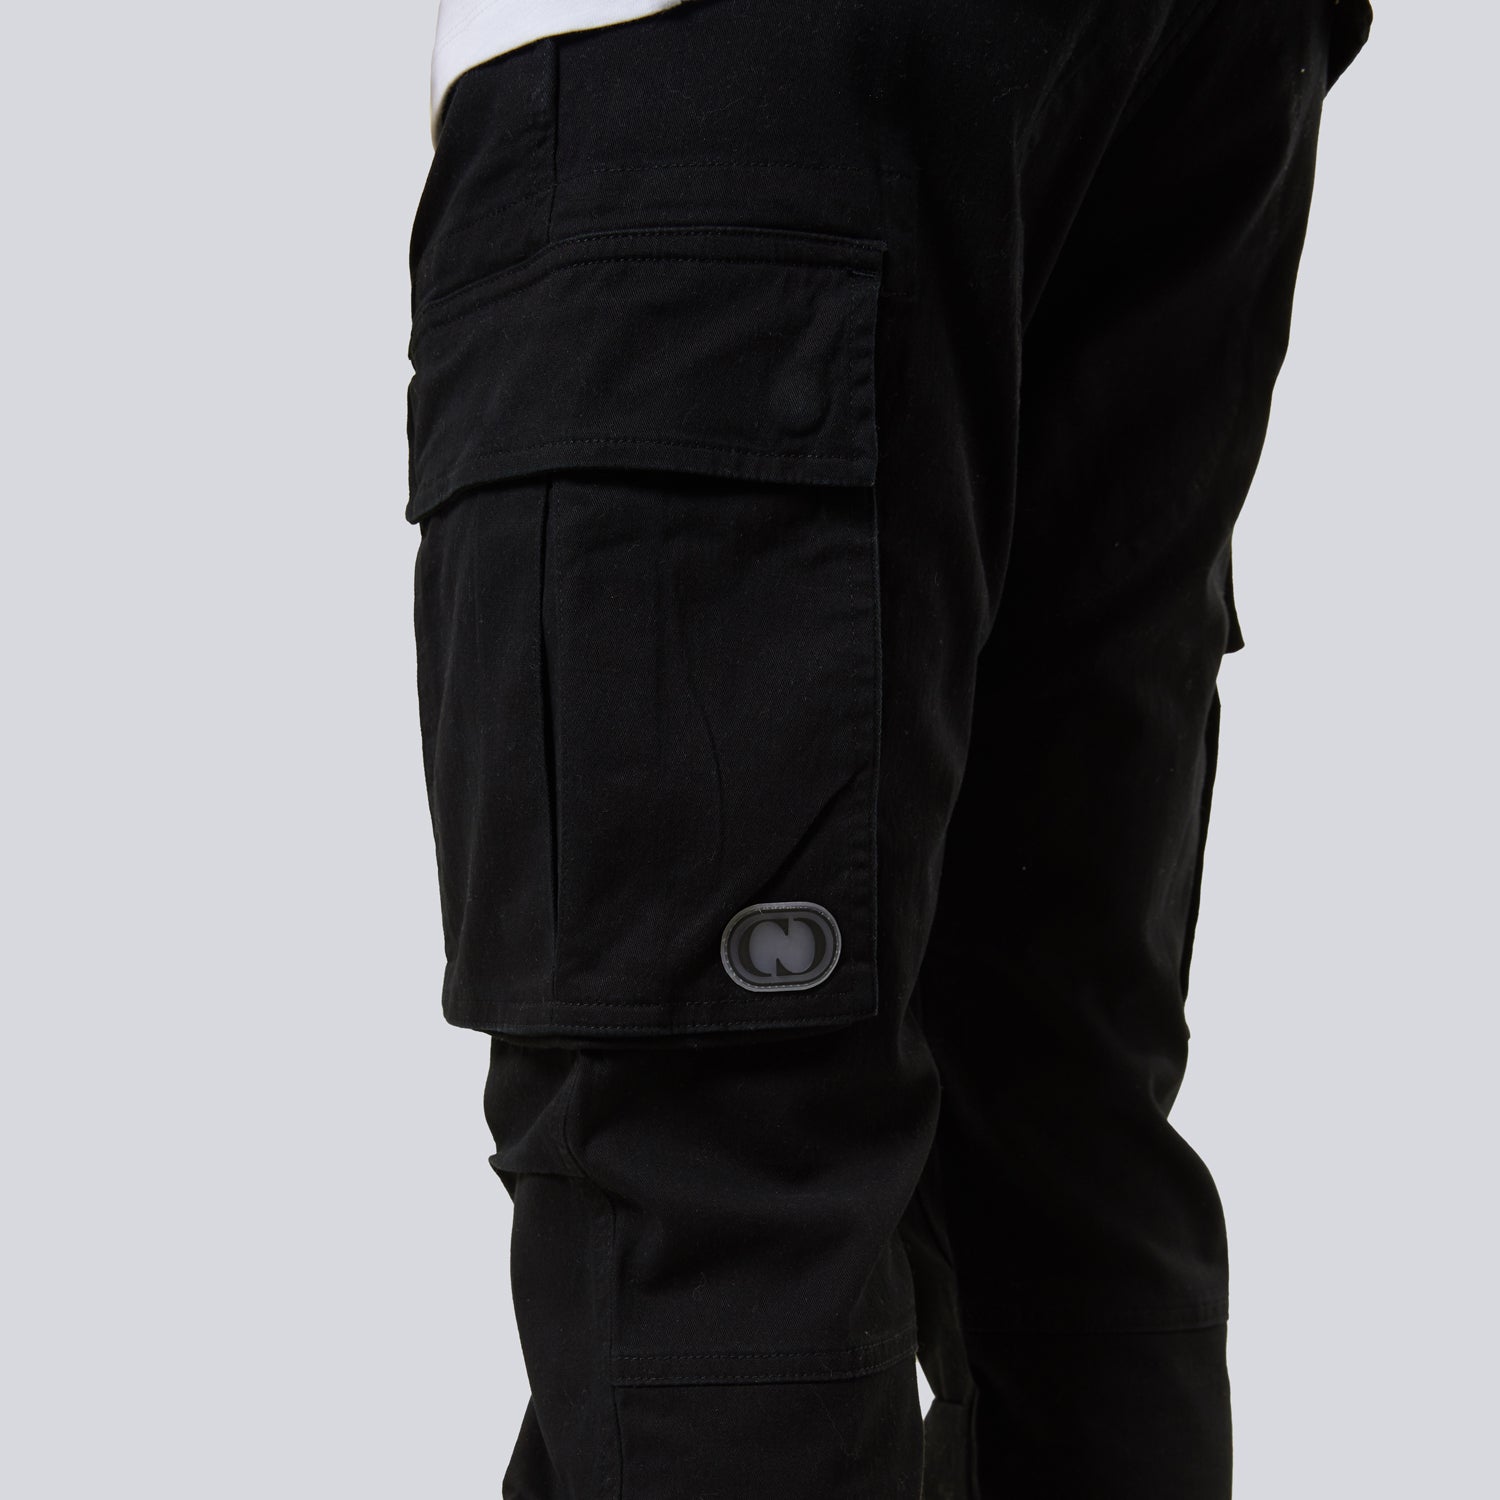 Fall Clearance Sale! RQYYD Cargo Pants for Mens Lightweight Work Pants  Hiking Ripstop Cargo Pants Cargo Pant-Reg and Big and Tall Sizes(Black,3XL)  - Walmart.com